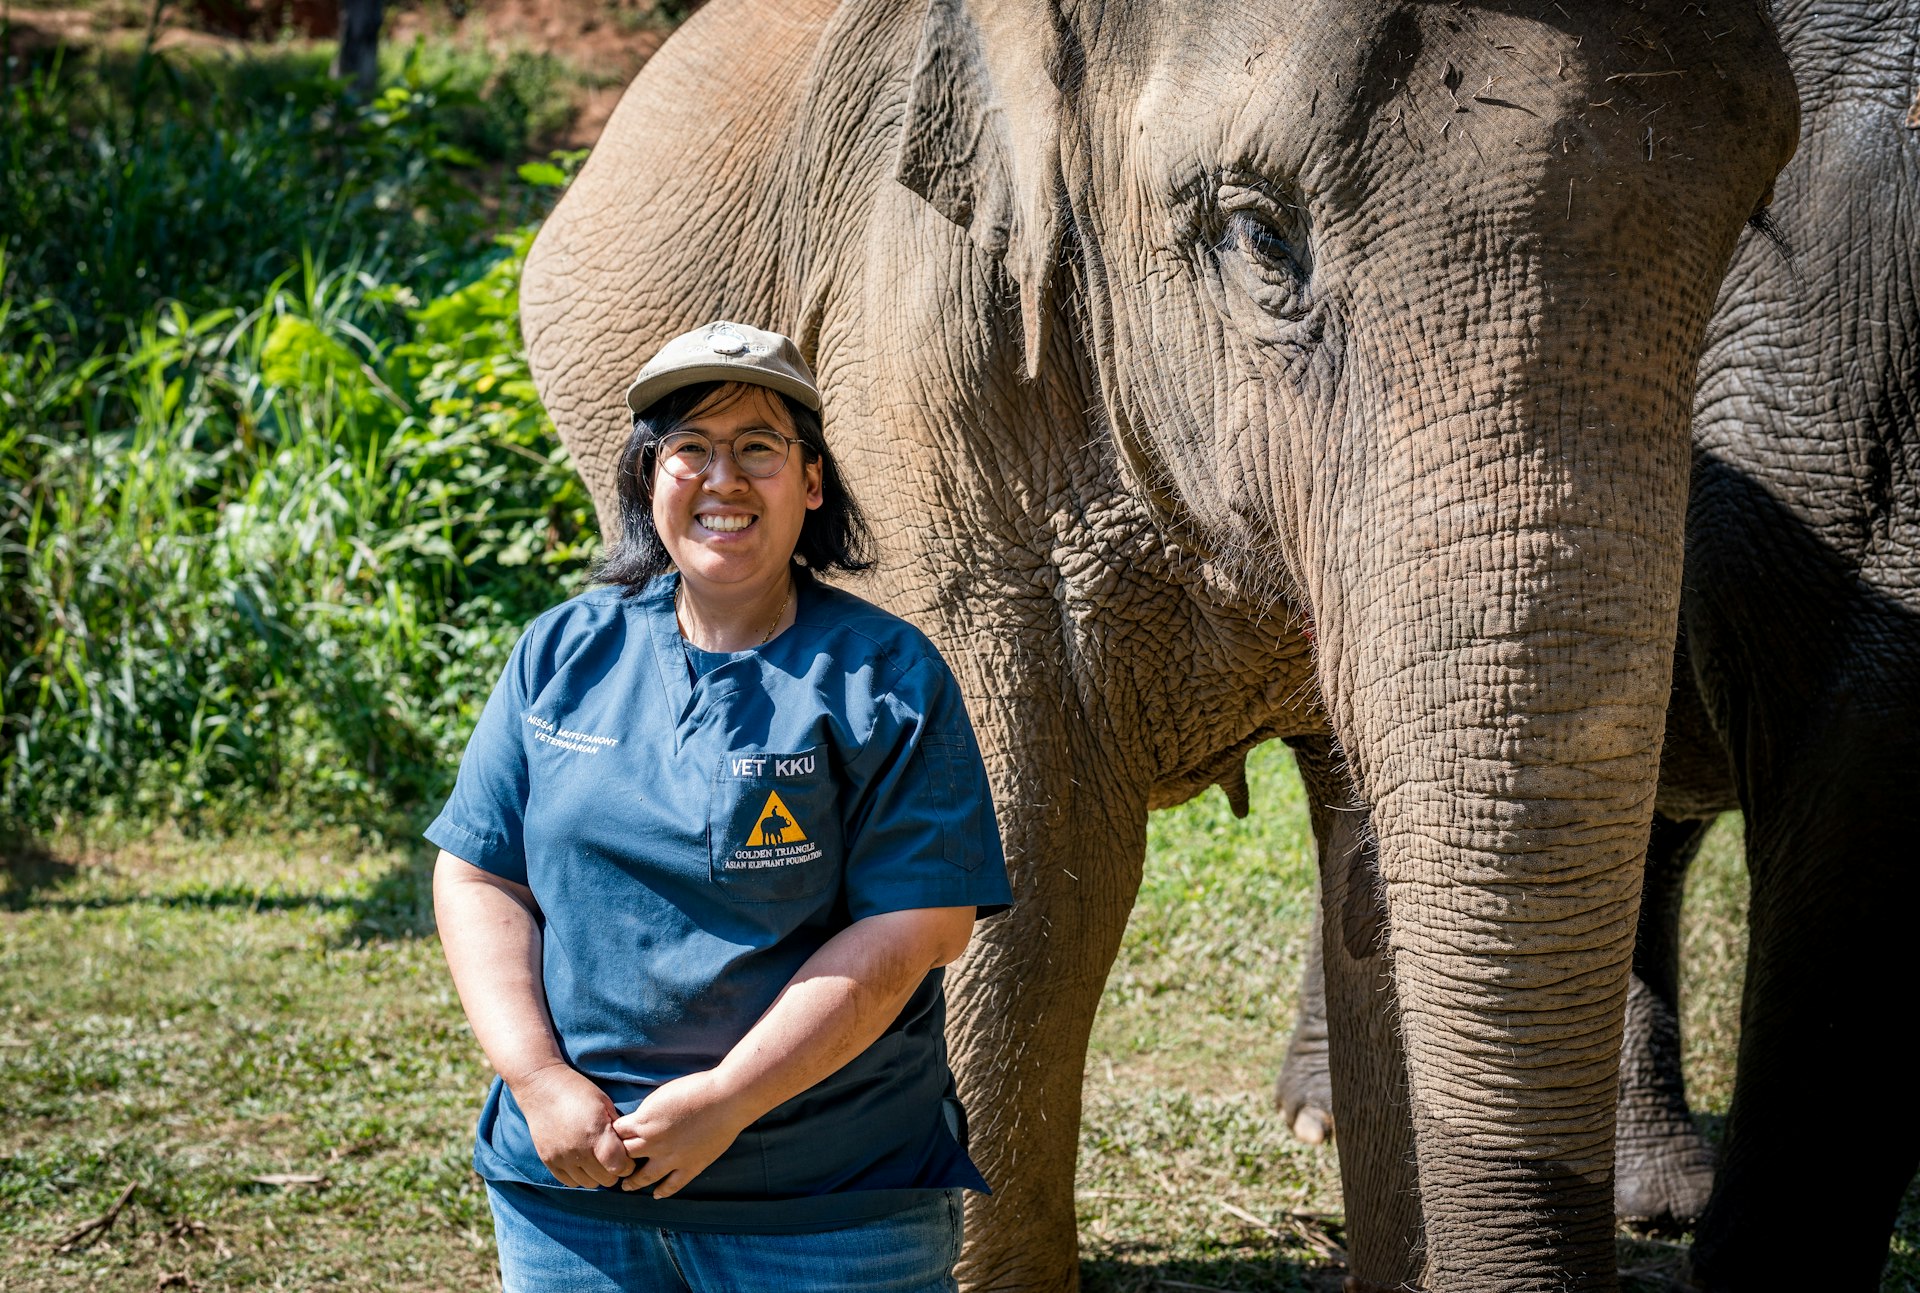 A vet stands next to an elephant and smiles into the camera